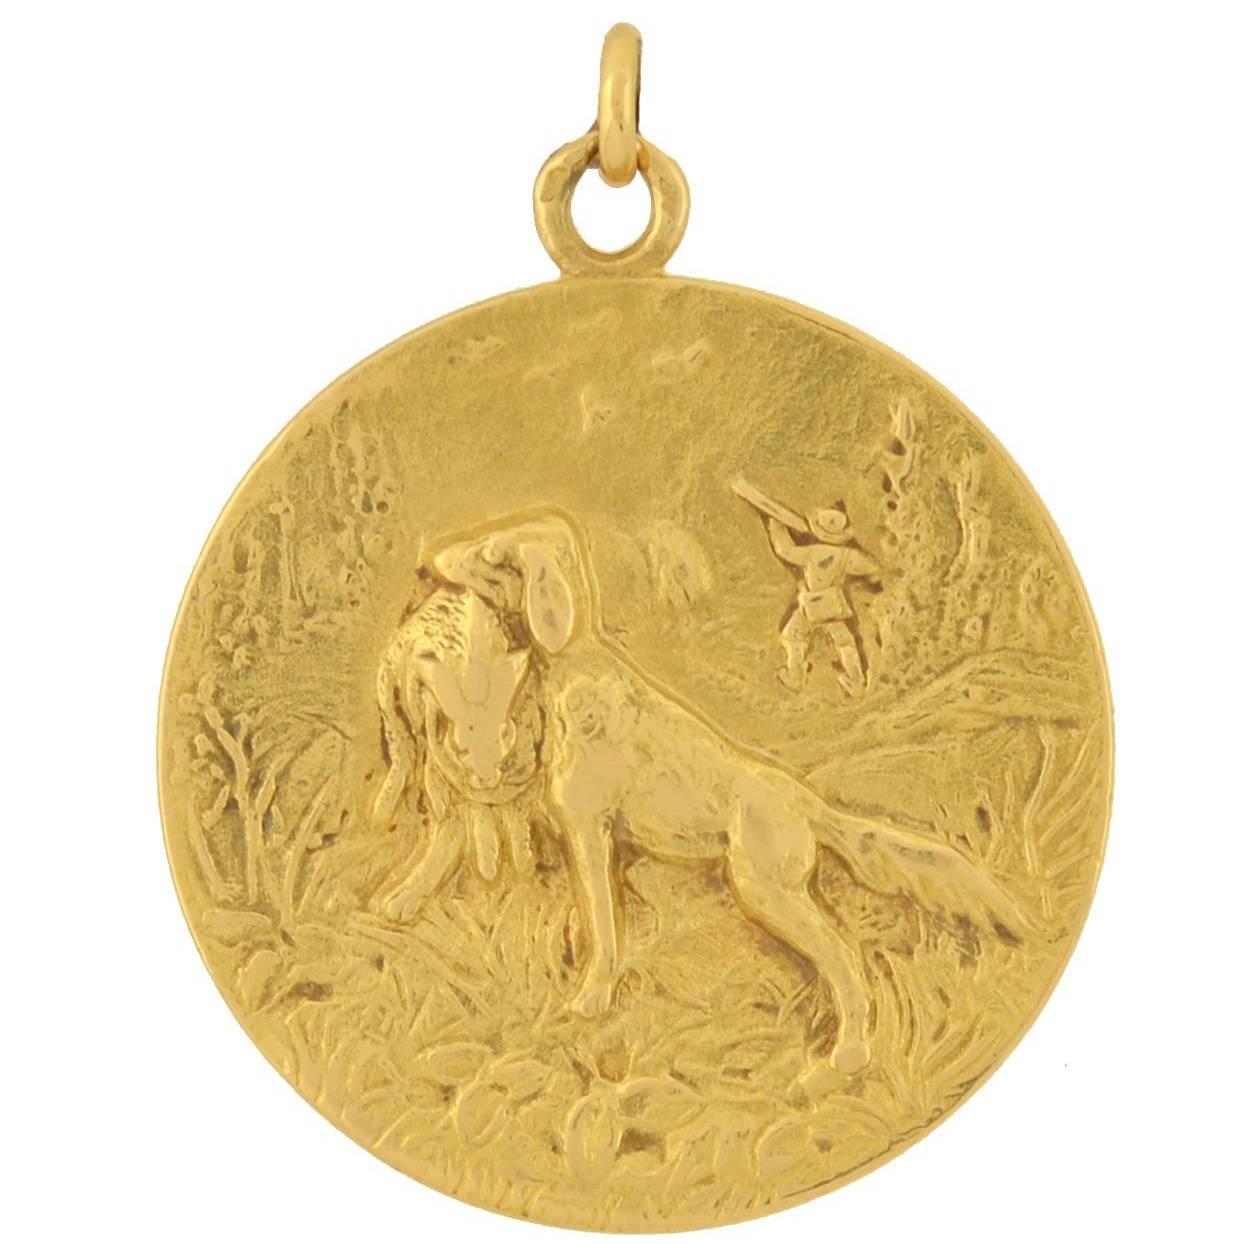 Cartier Edwardian Gold Disc Pendant with Hunting Dog Motif